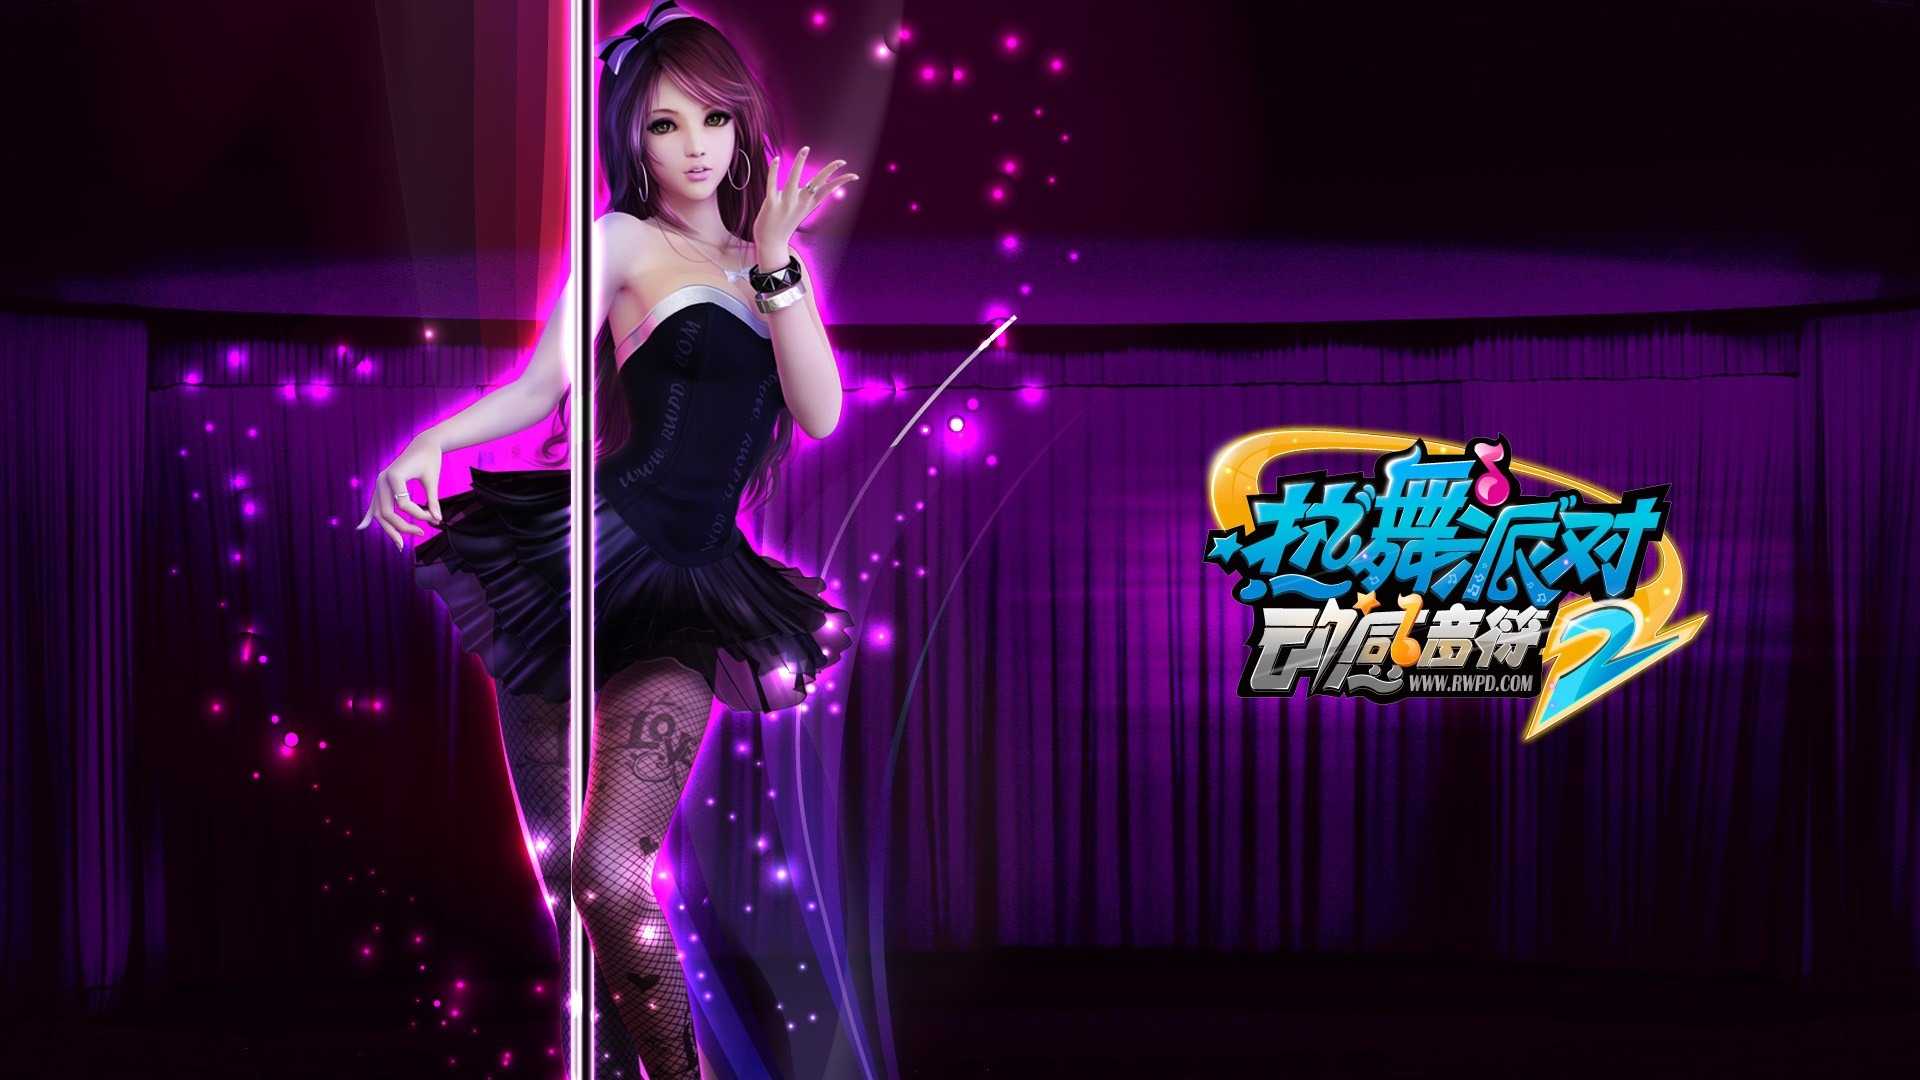 Online game Hot Dance Party II official wallpapers #30 - 1920x1080